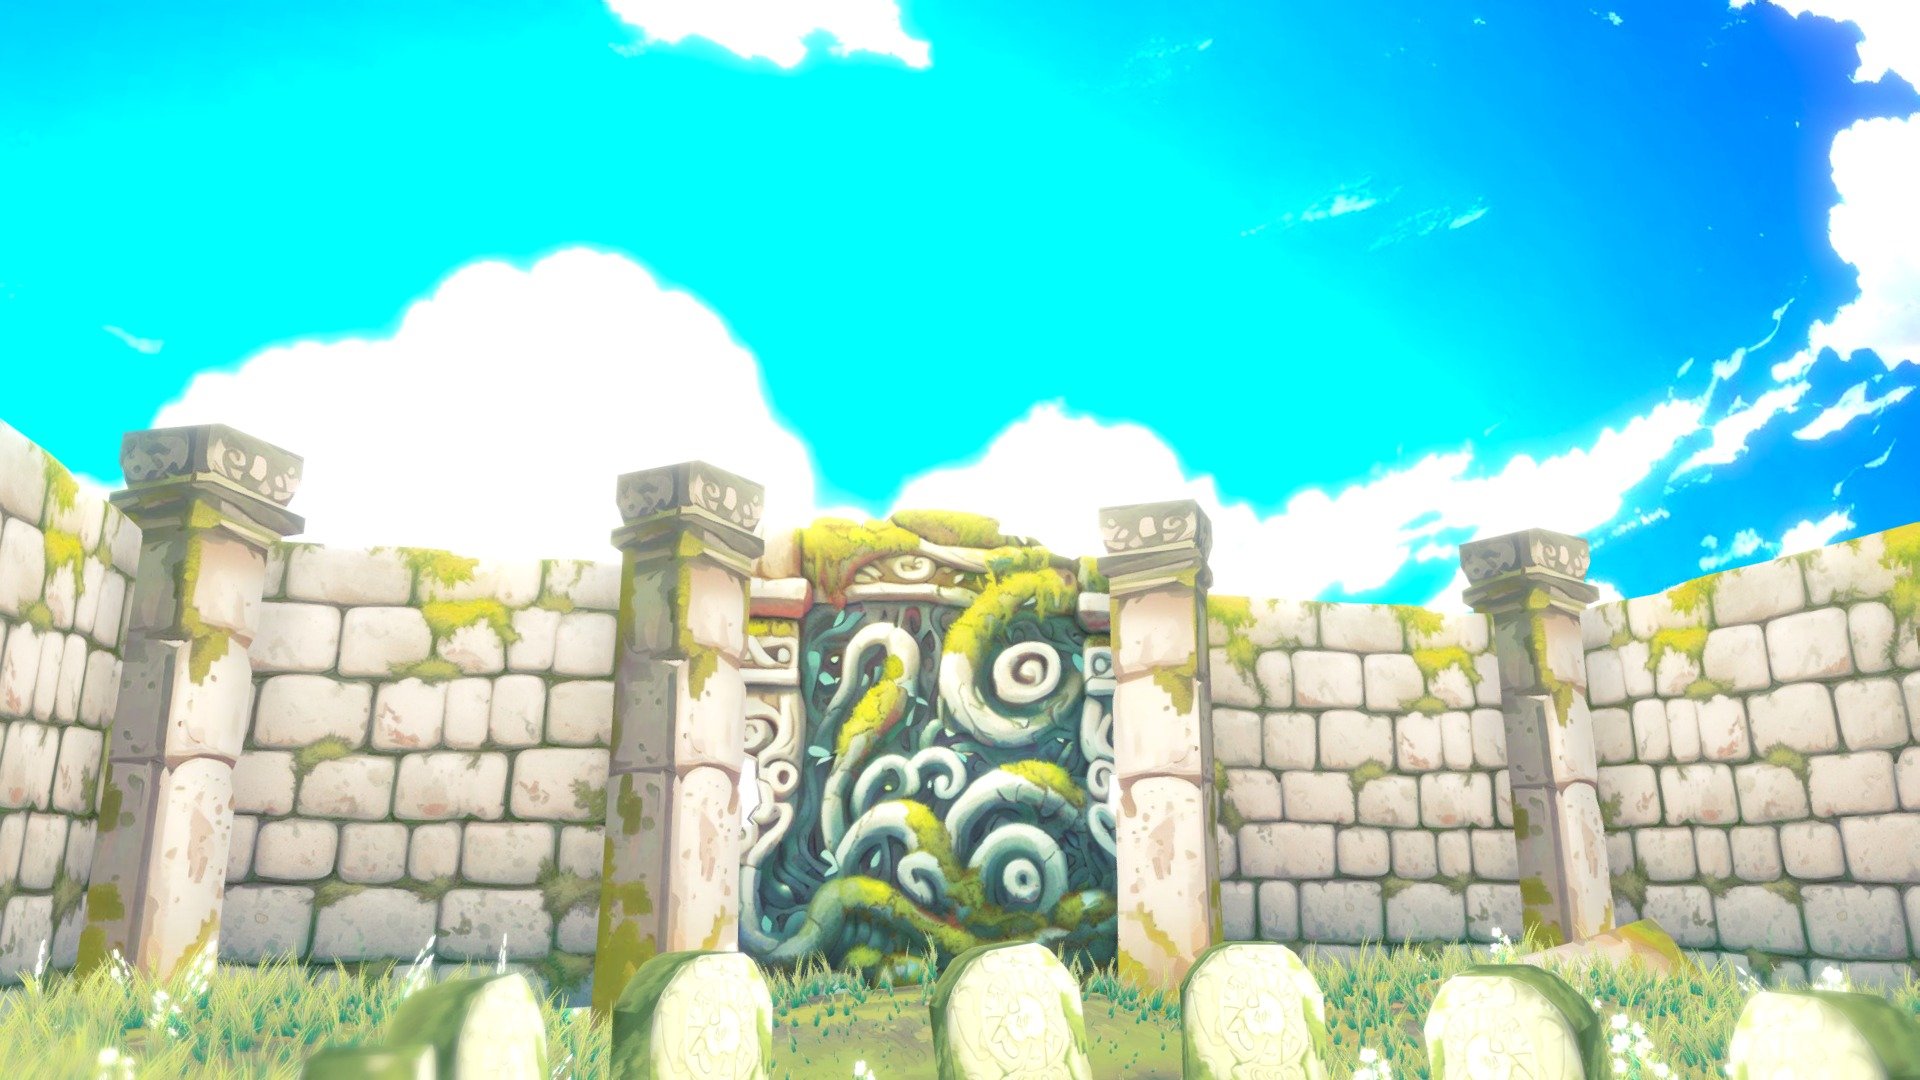 The Wall of Elf - Stylized Low Poly Game Scene

*Embark on a mystical journey through &ldquo;The Wall of Elf,